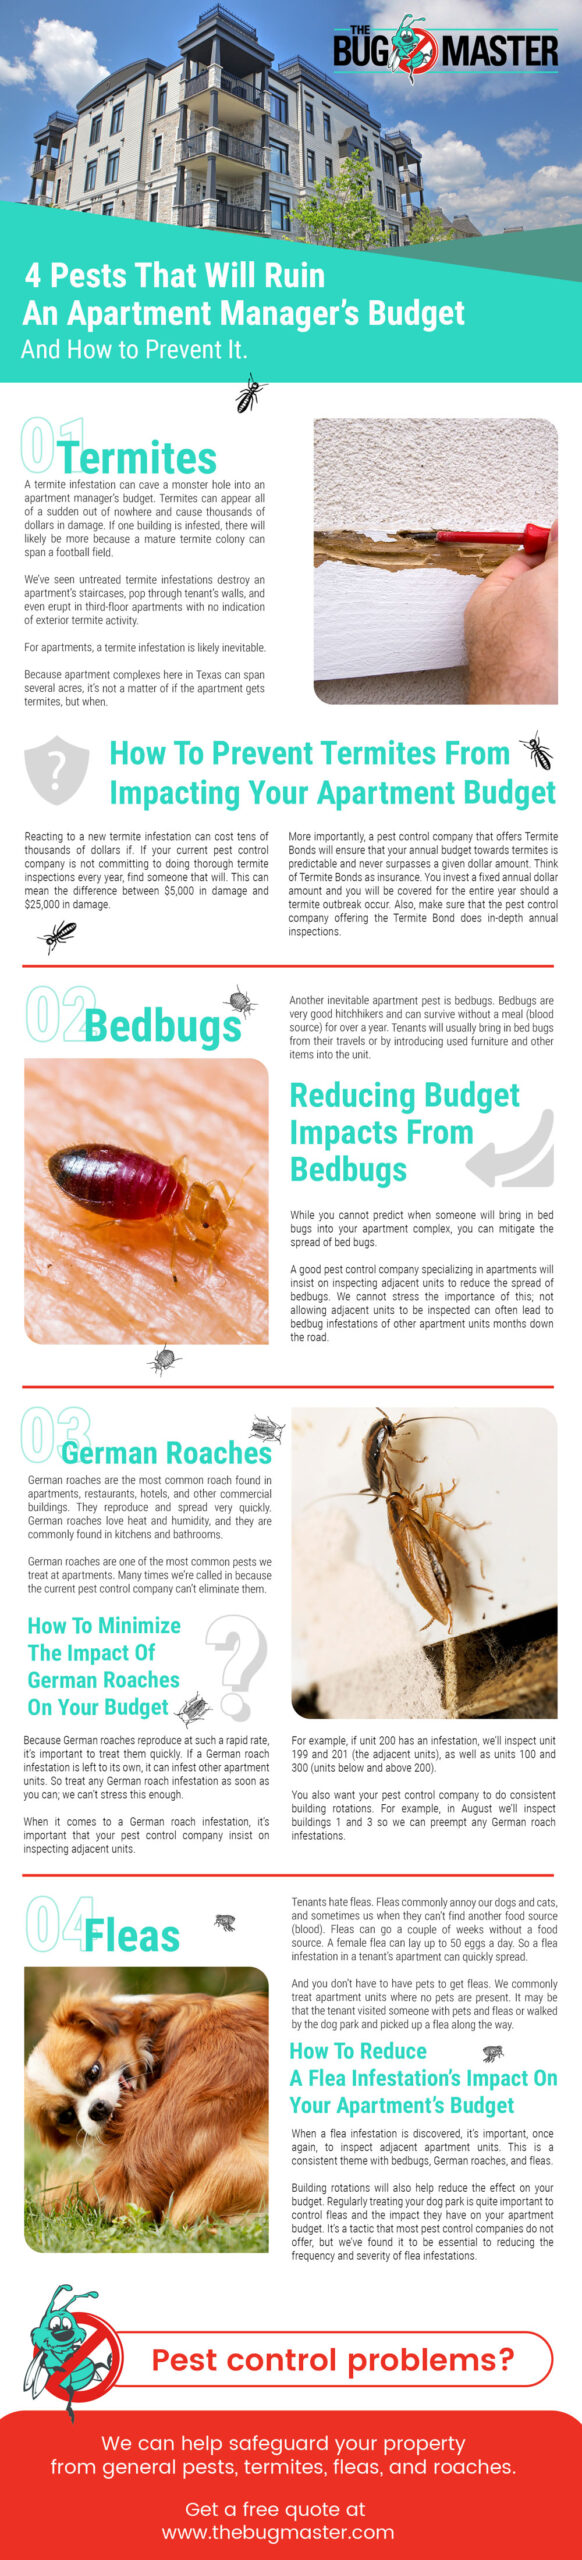 Infographic detailing 4 pests that will ruin an apartment manager's budget